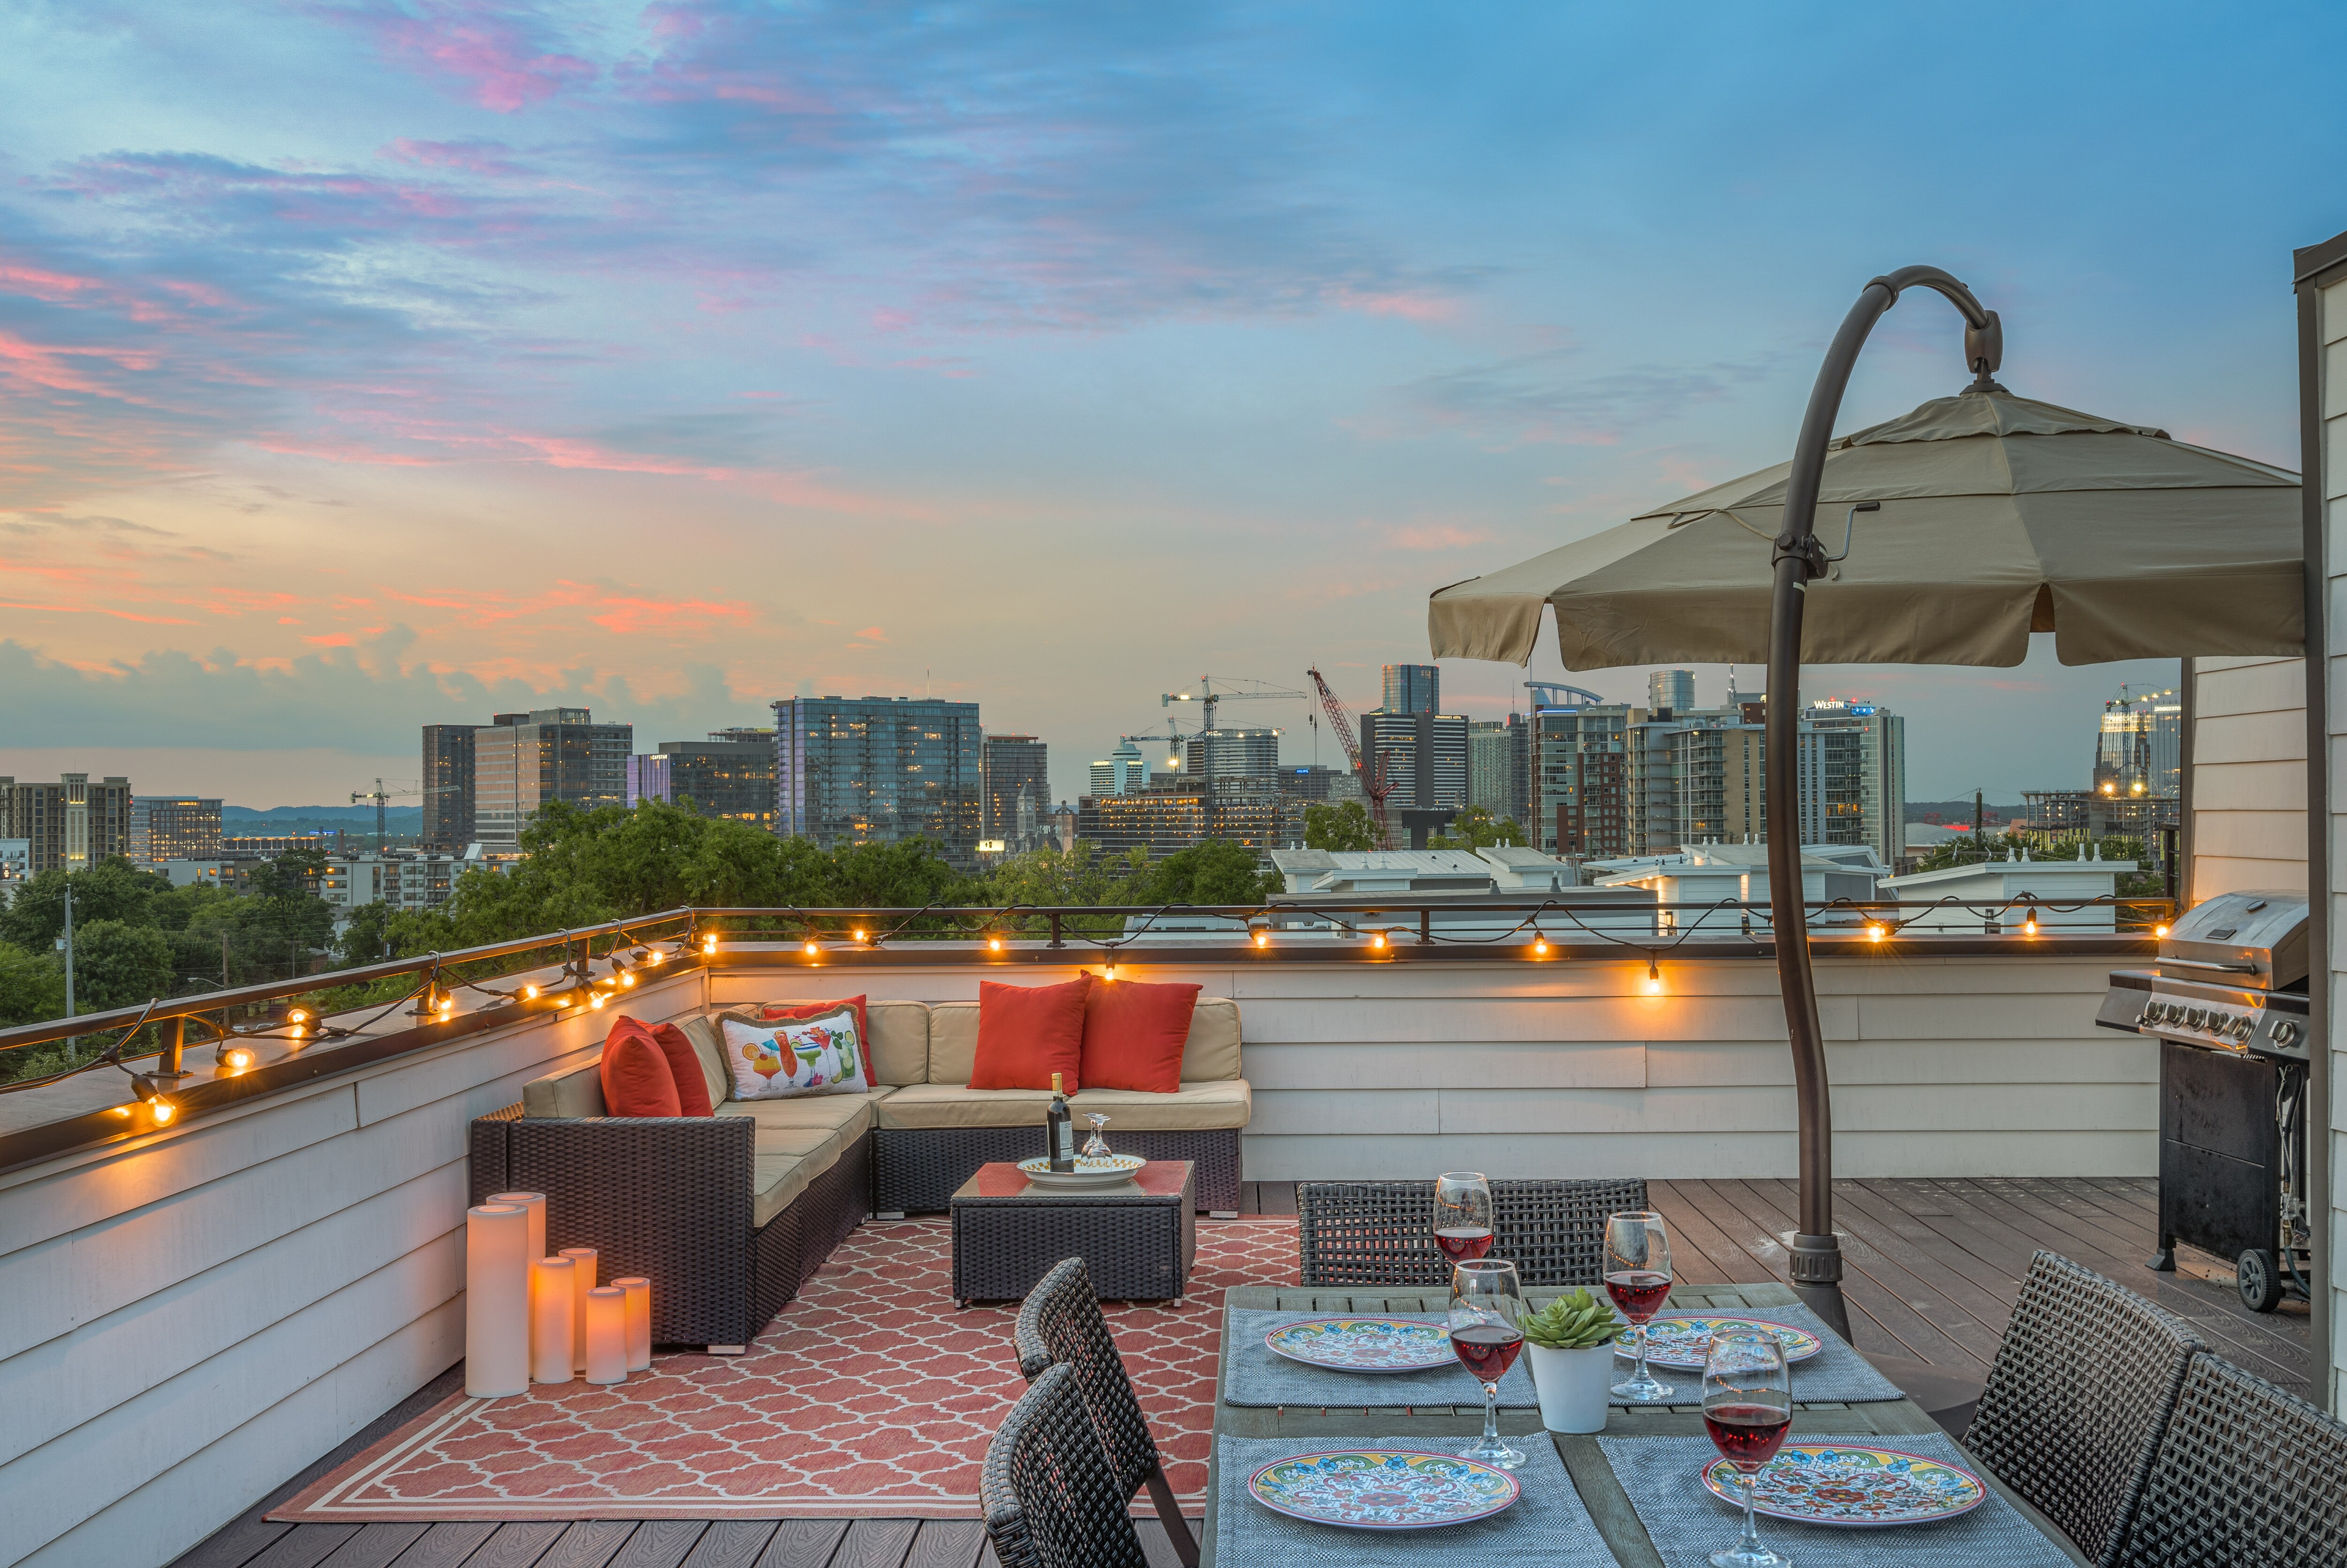 Property Image 1 - Upscale Gulch Getaway – Rooftop Deck, Skyline View